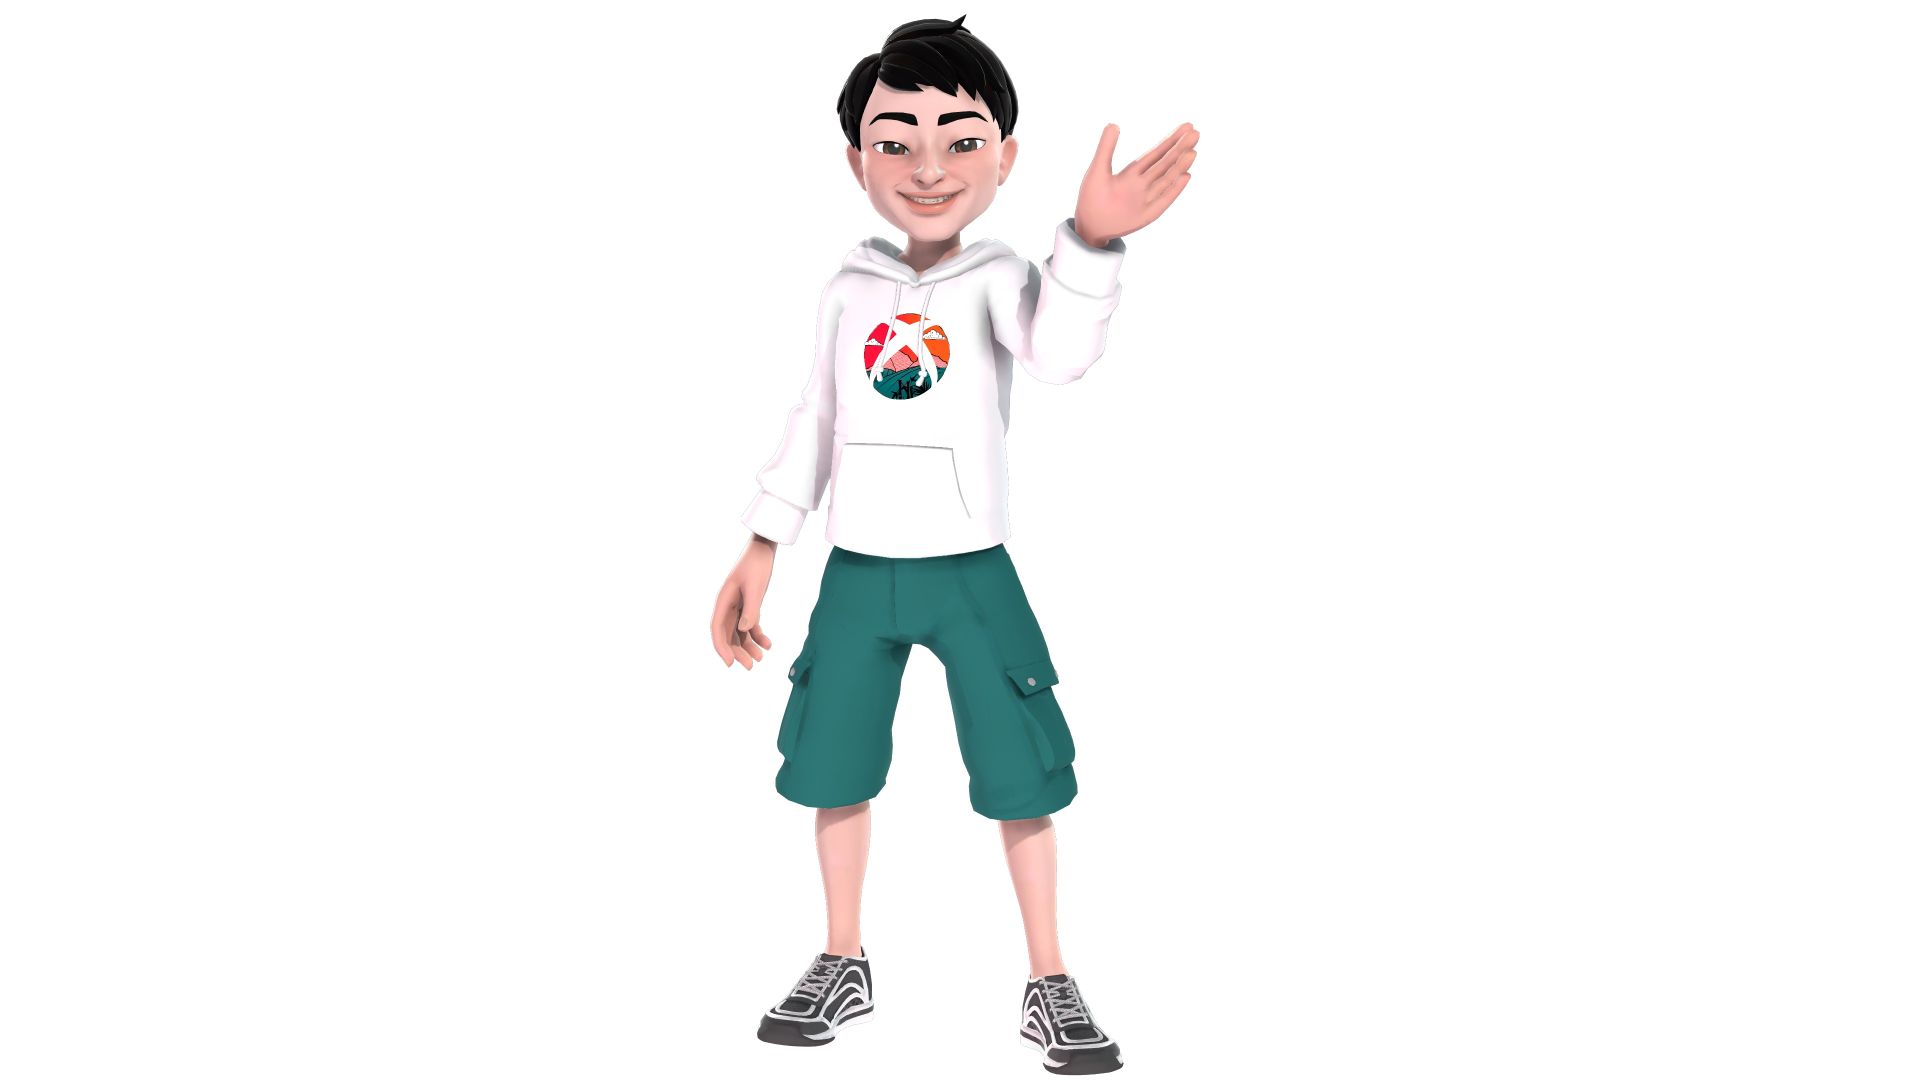 An Xbox avatar wearing a white hooded sweatshirt with the Asian and Pacific Islander logo on the front and green shorts. 